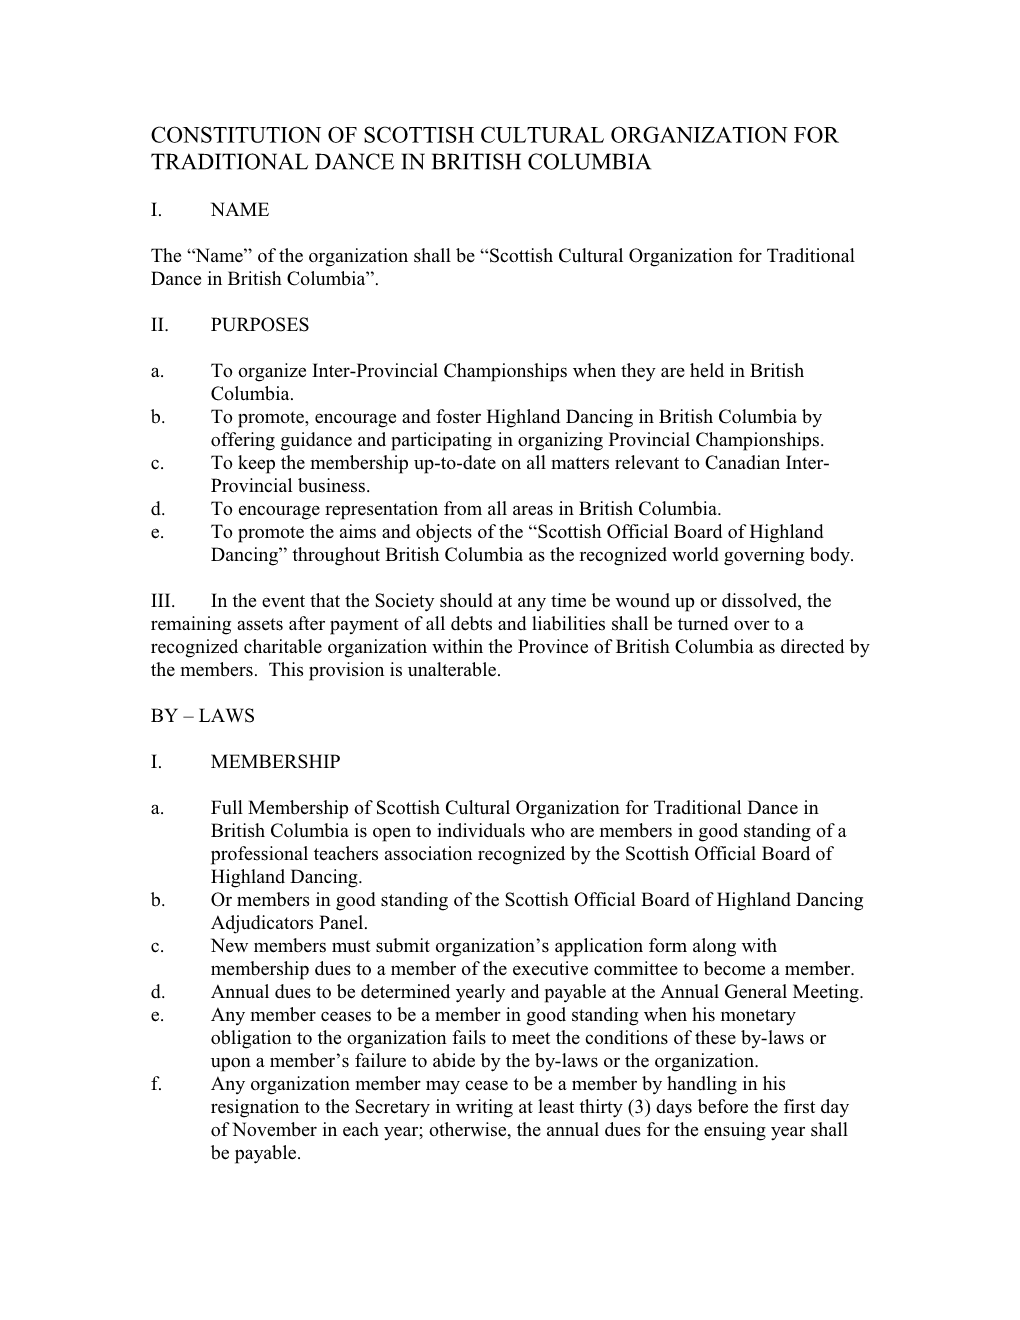 Constitution of Scottish Cultural Organization for Tradition Dance in British Columbia